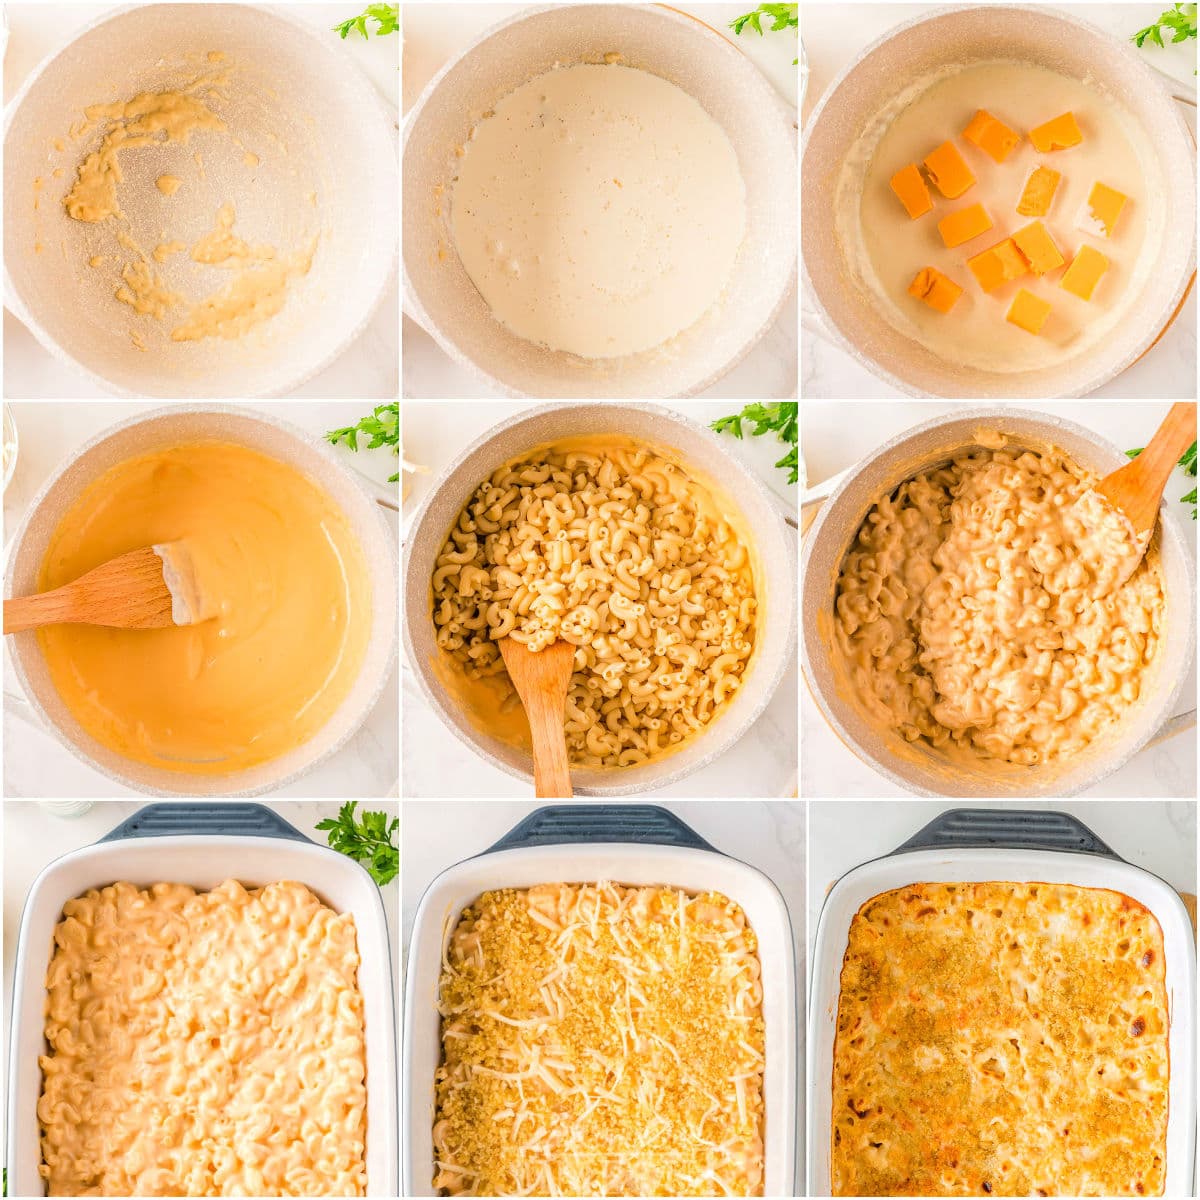 nine image collage showing how to make velveeta mac and cheese with step by step photos.